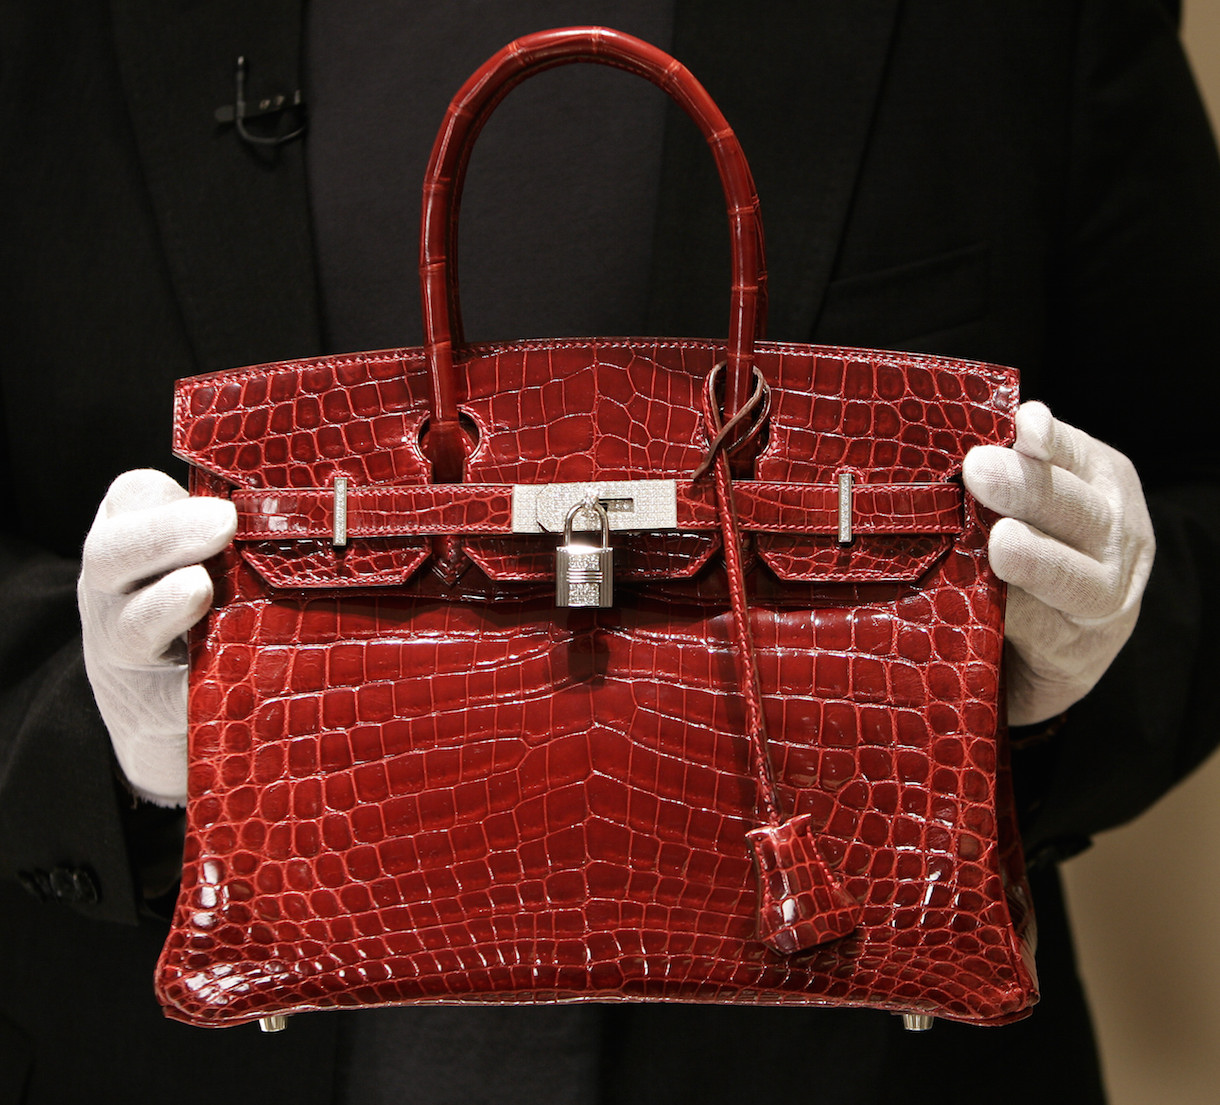 An employee holding a US$129,000 RM491,000) crocodile-skin Hermes ‘Birkin’ bag during a private opening for the new Hermes store on Wall Street. Jane Birkin asked Hermes to rename the mythical crocodile bag series bearing her name, 'until better practices that meet international standards’ are in place for the slaughter of these animals. – AFP pic, July 29, 2015.